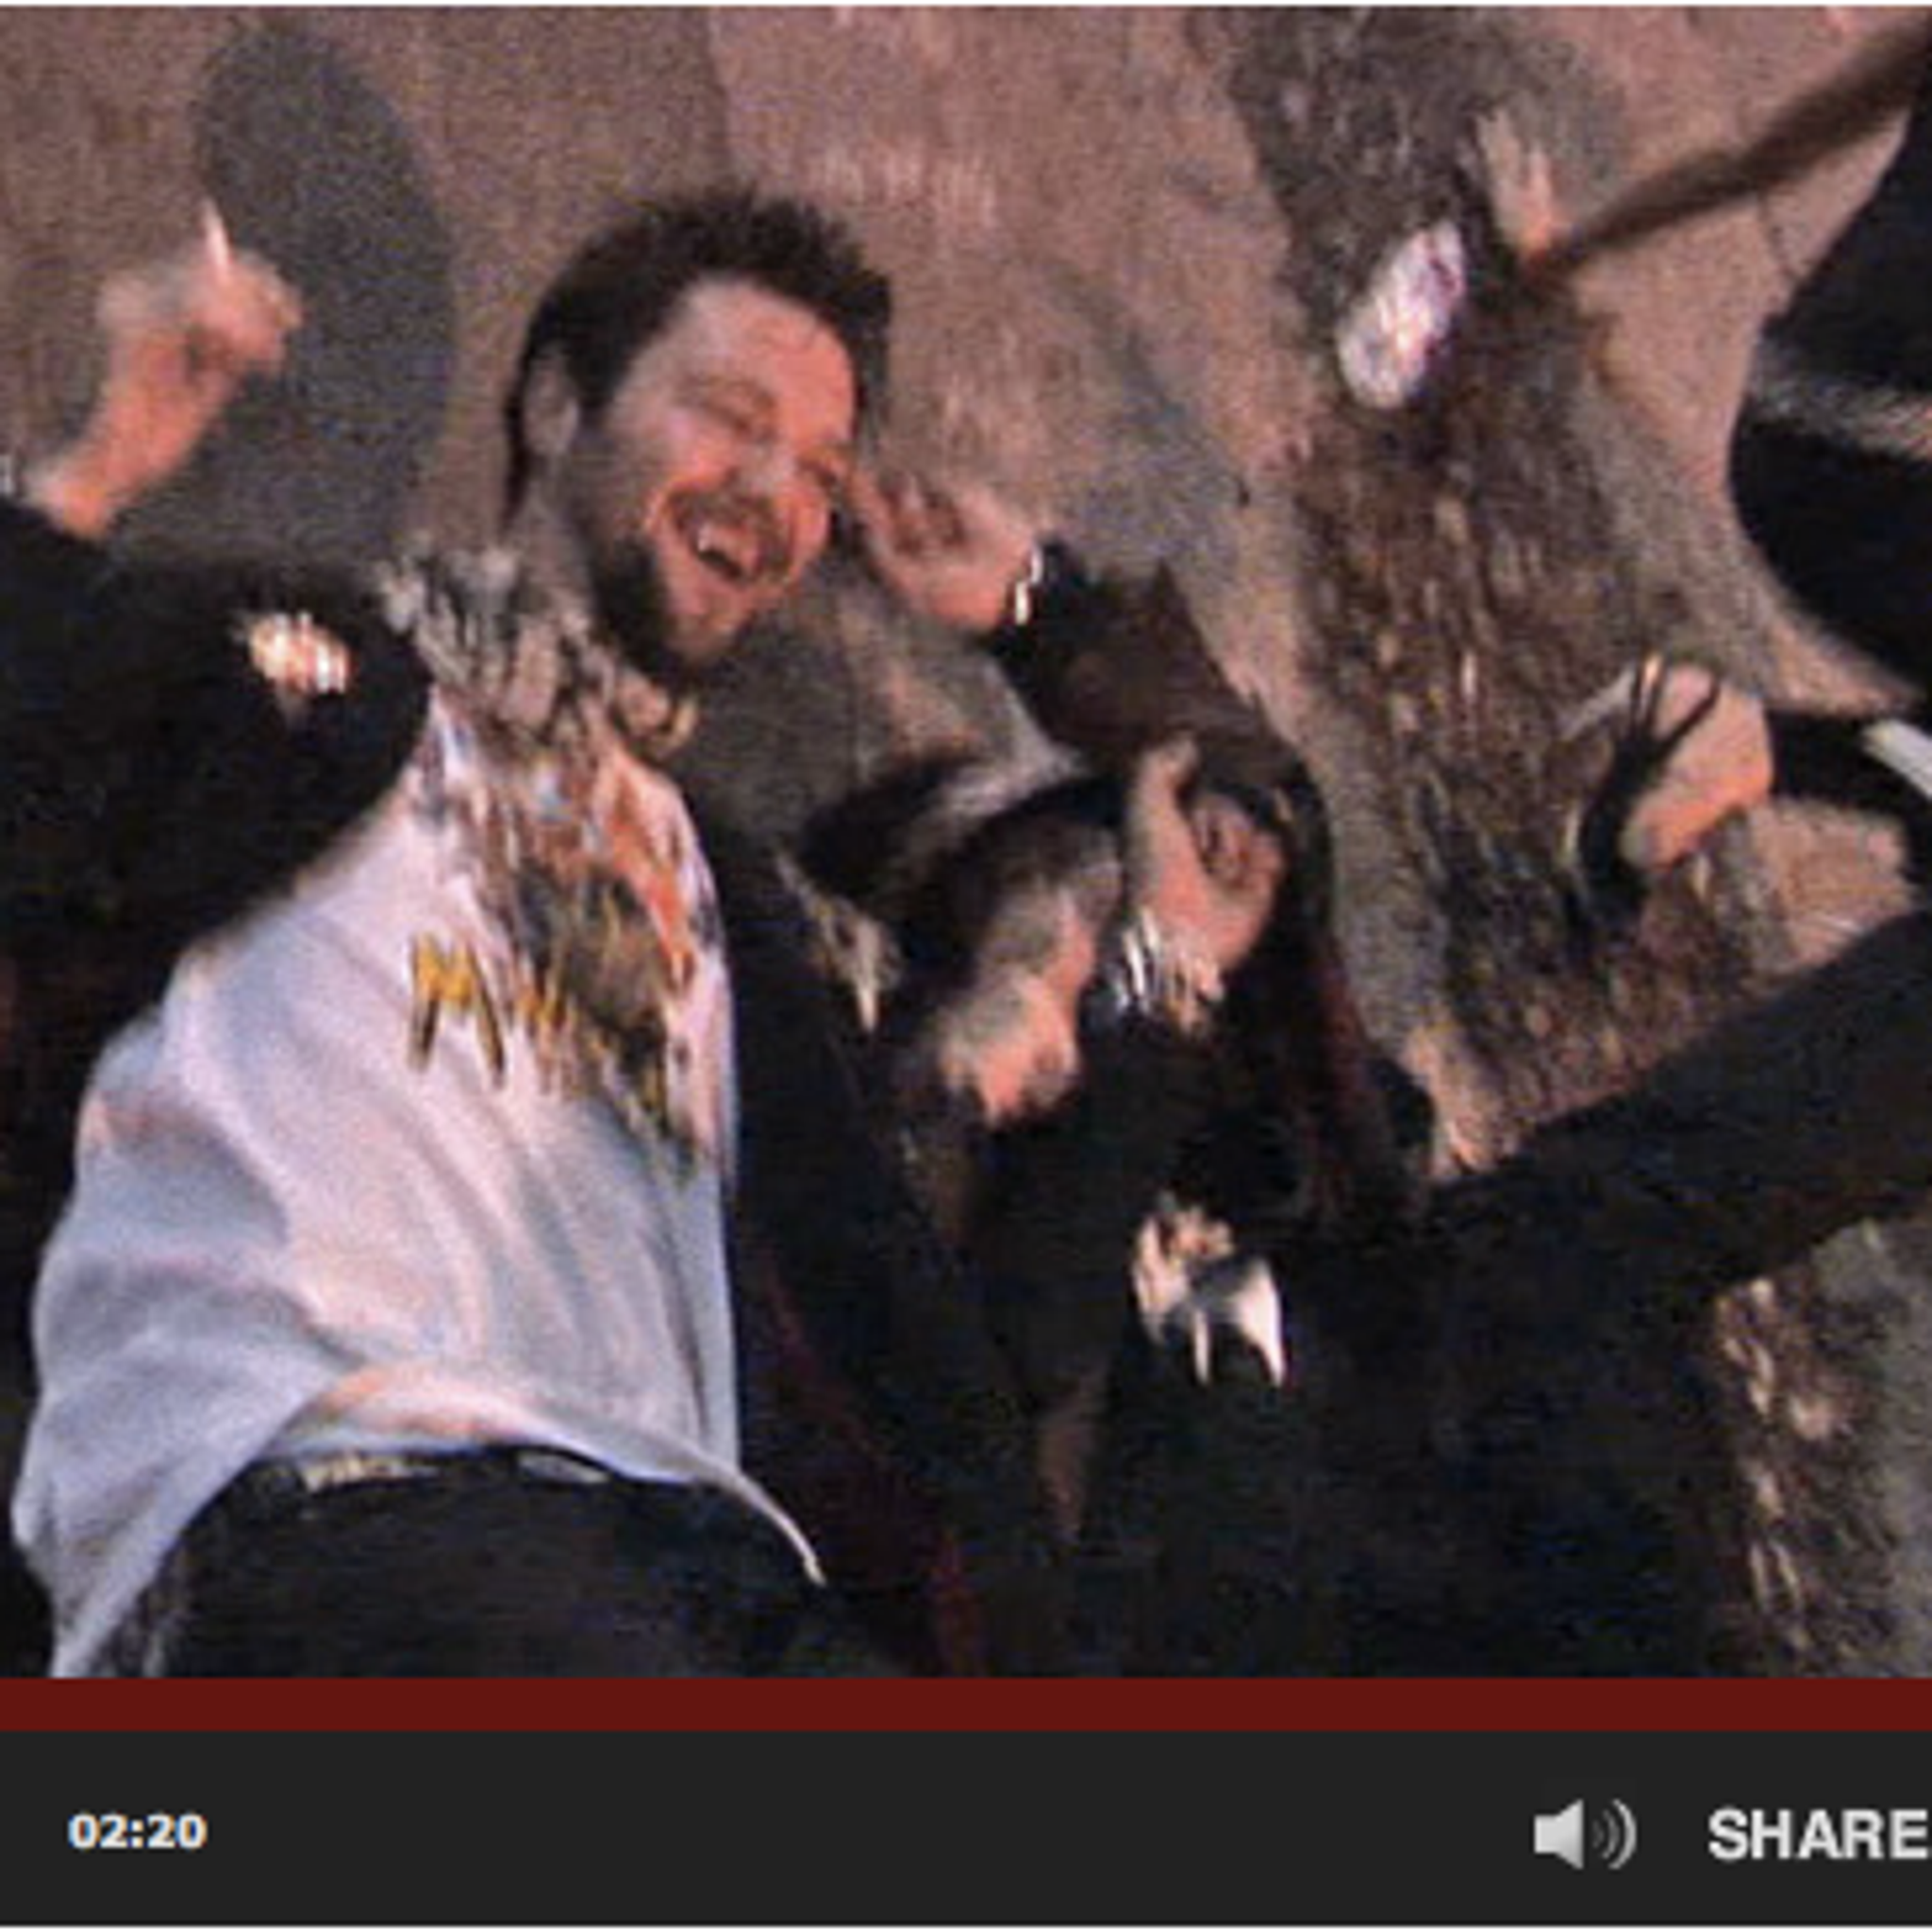 Bam Margera -- Wasted hq nude pic